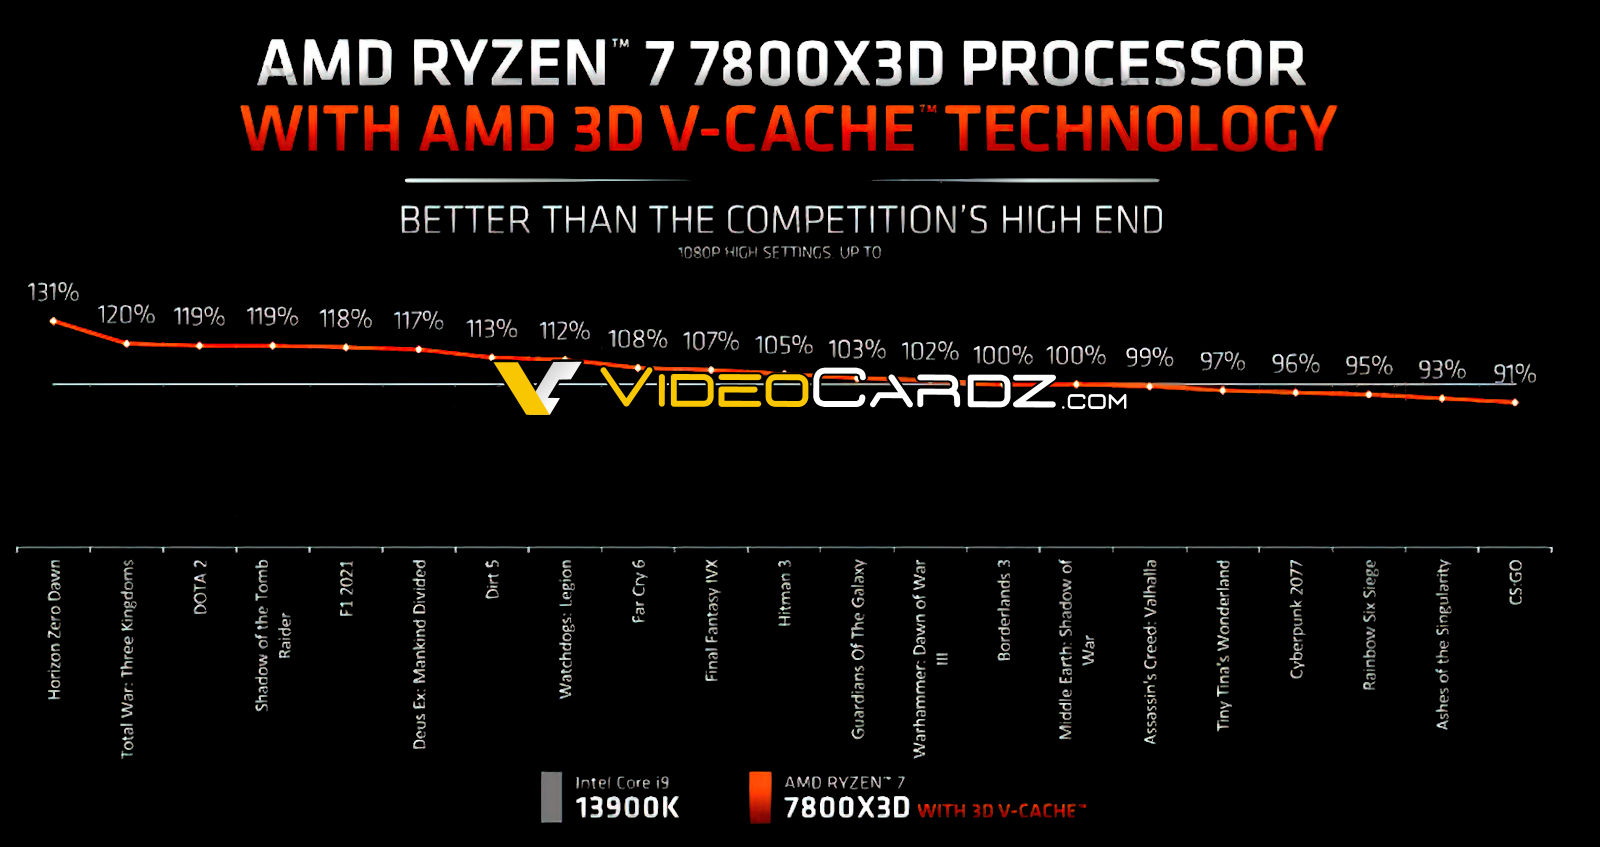 AMD Ryzen 7 7800X3D is 7% faster in gaming on average than Core i9-13900K  according to new AMD data 